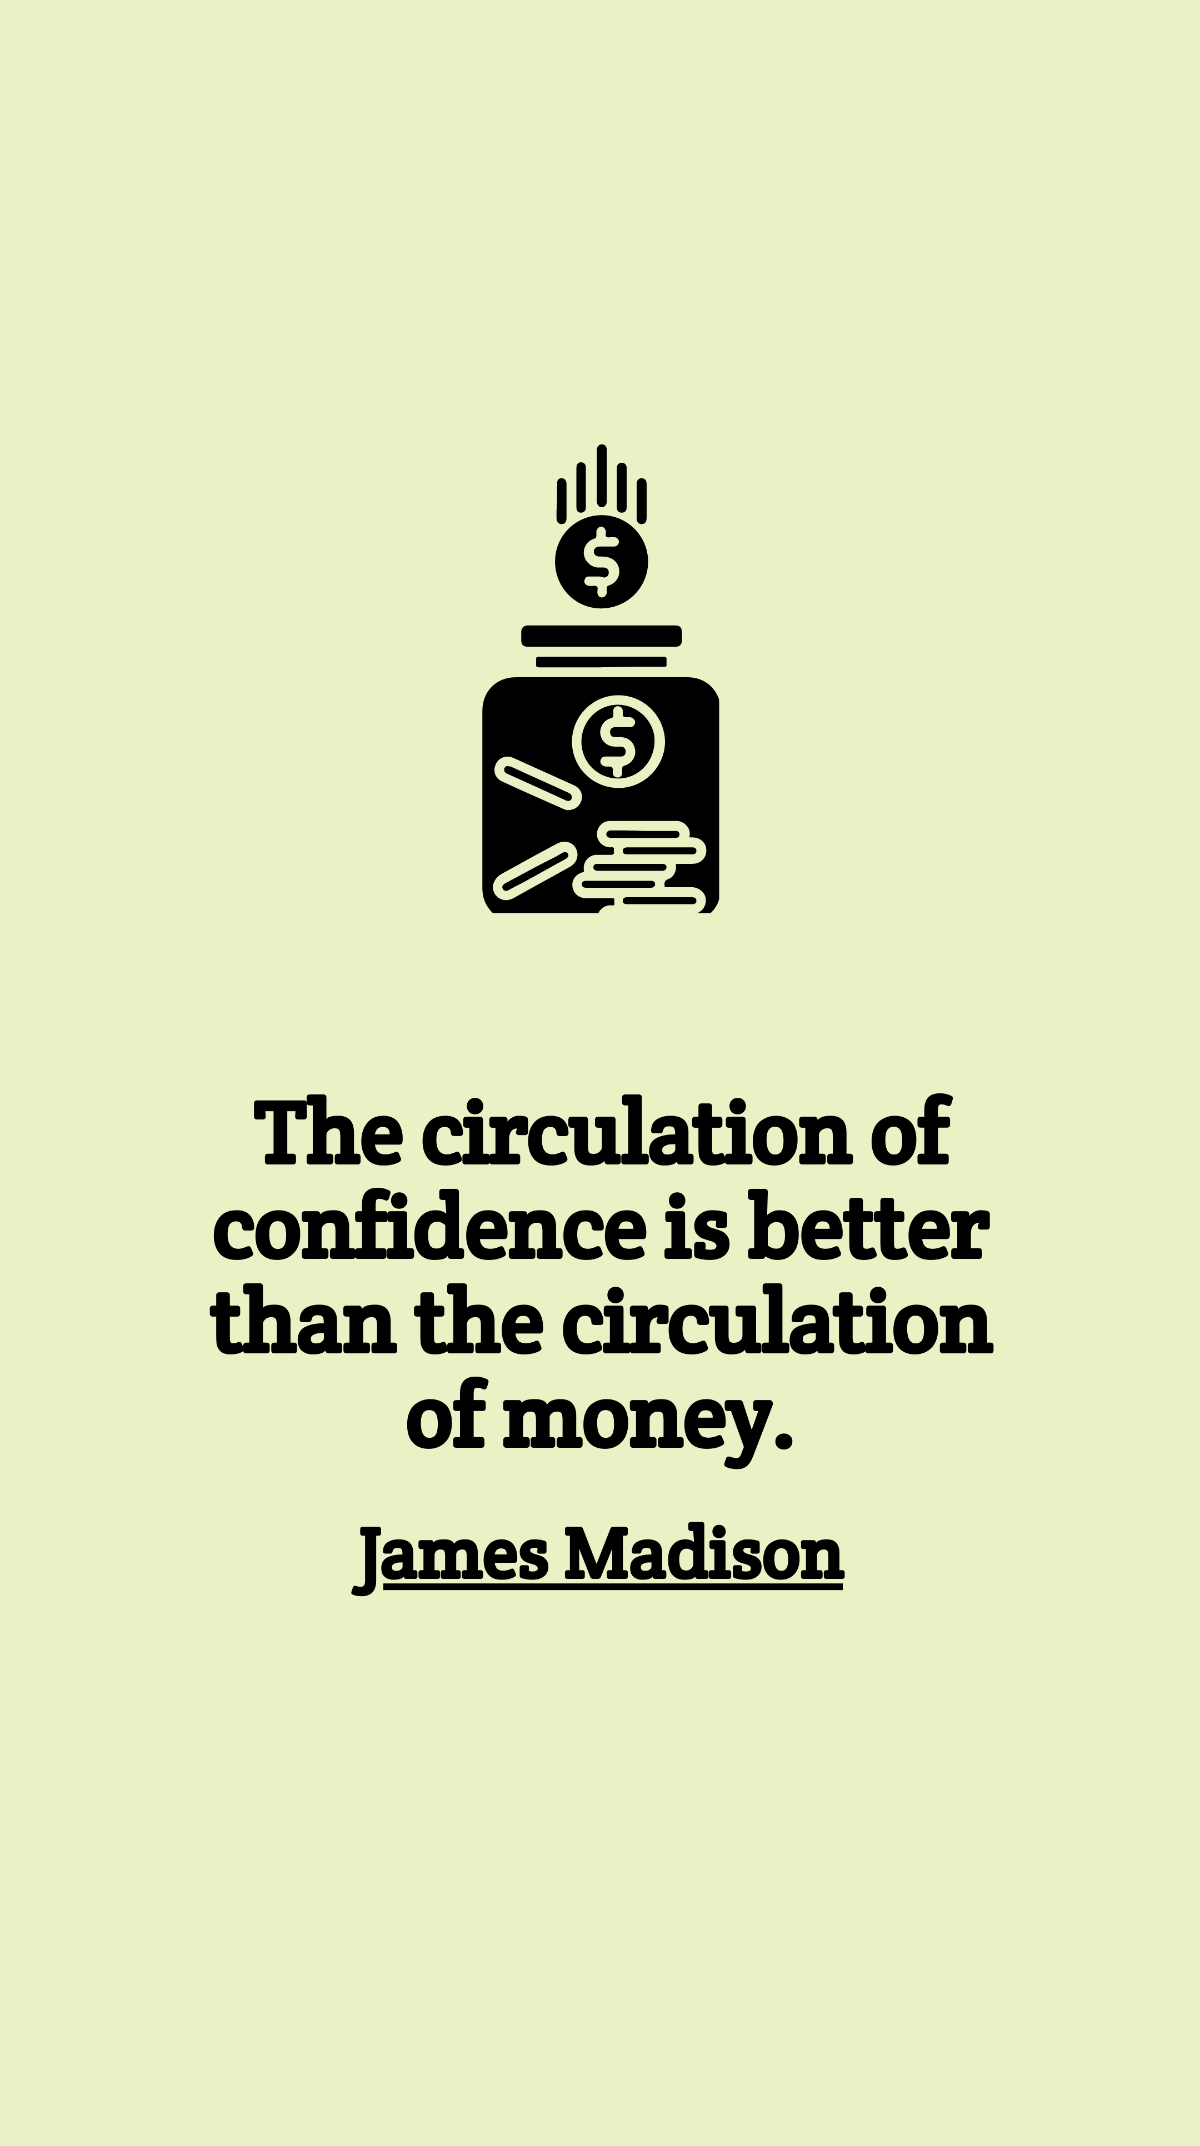 James Madison - The circulation of confidence is better than the circulation of money.